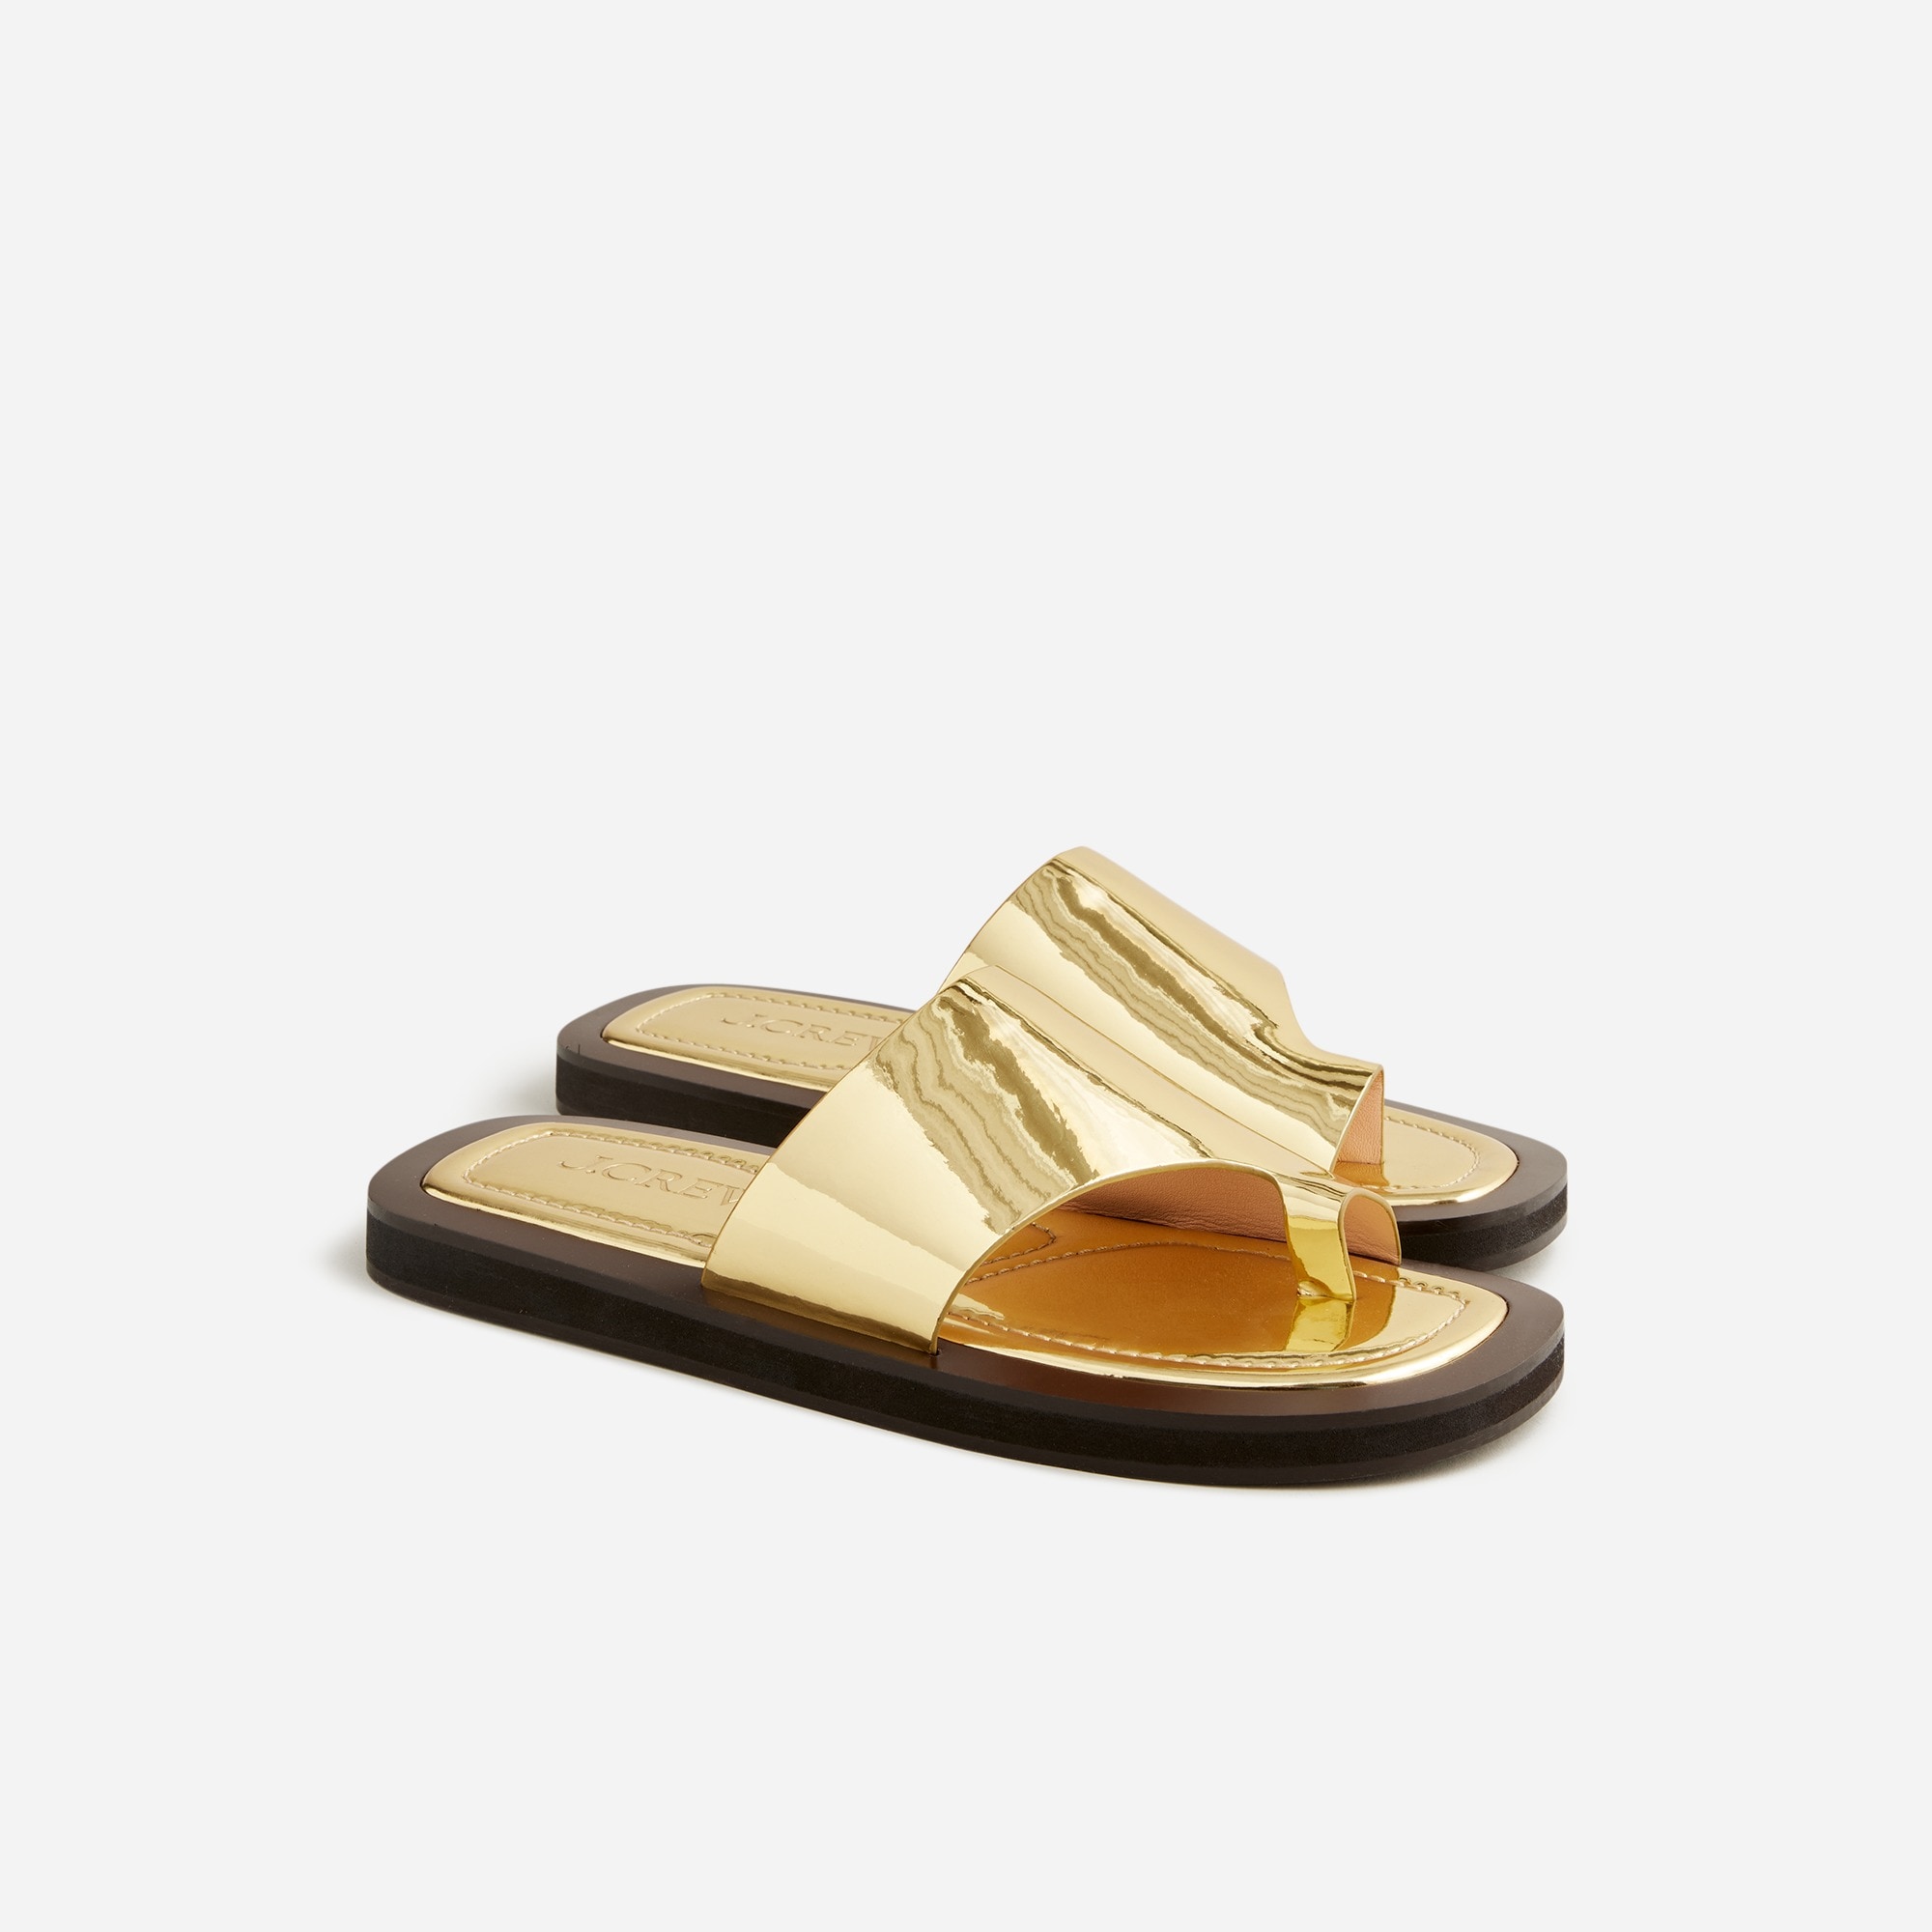  Toe-ring slide sandals in metallic leather